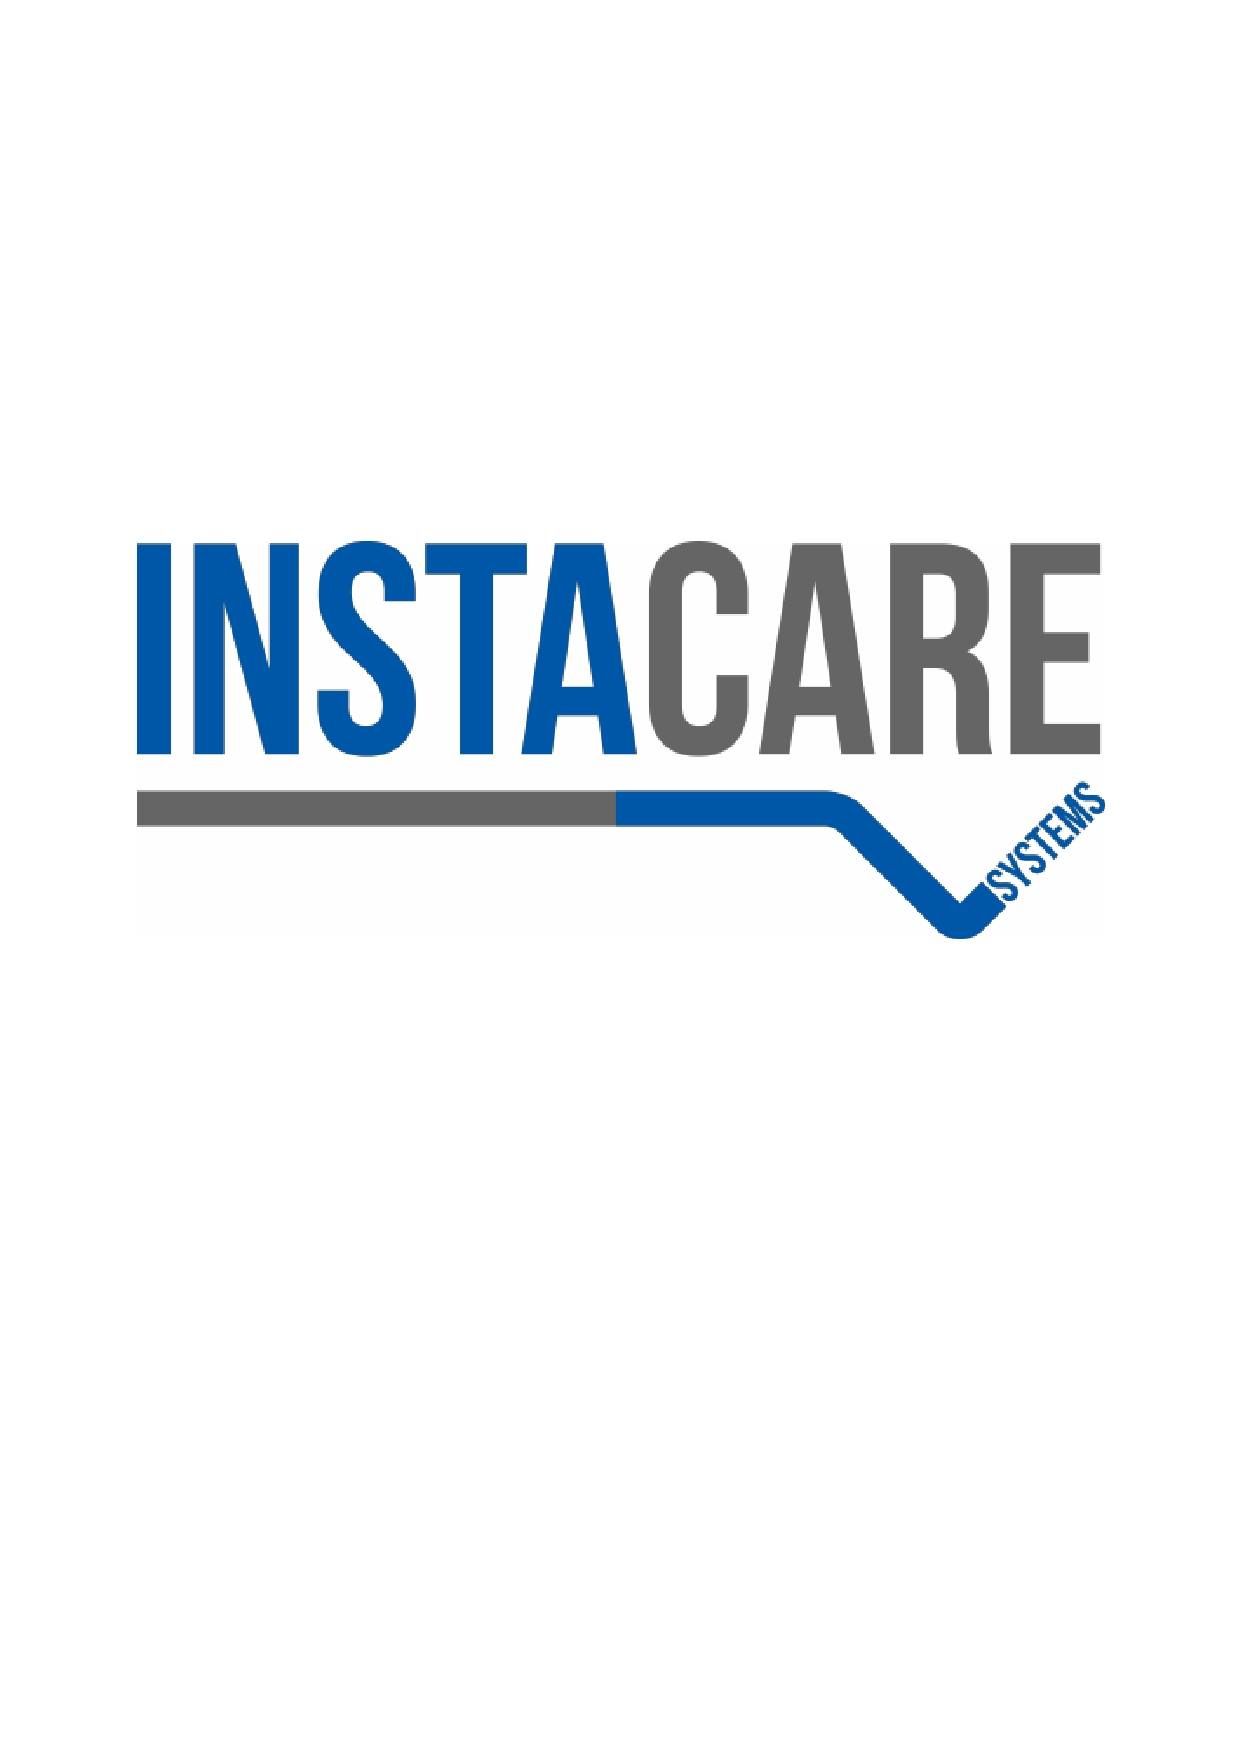 Instacare systems